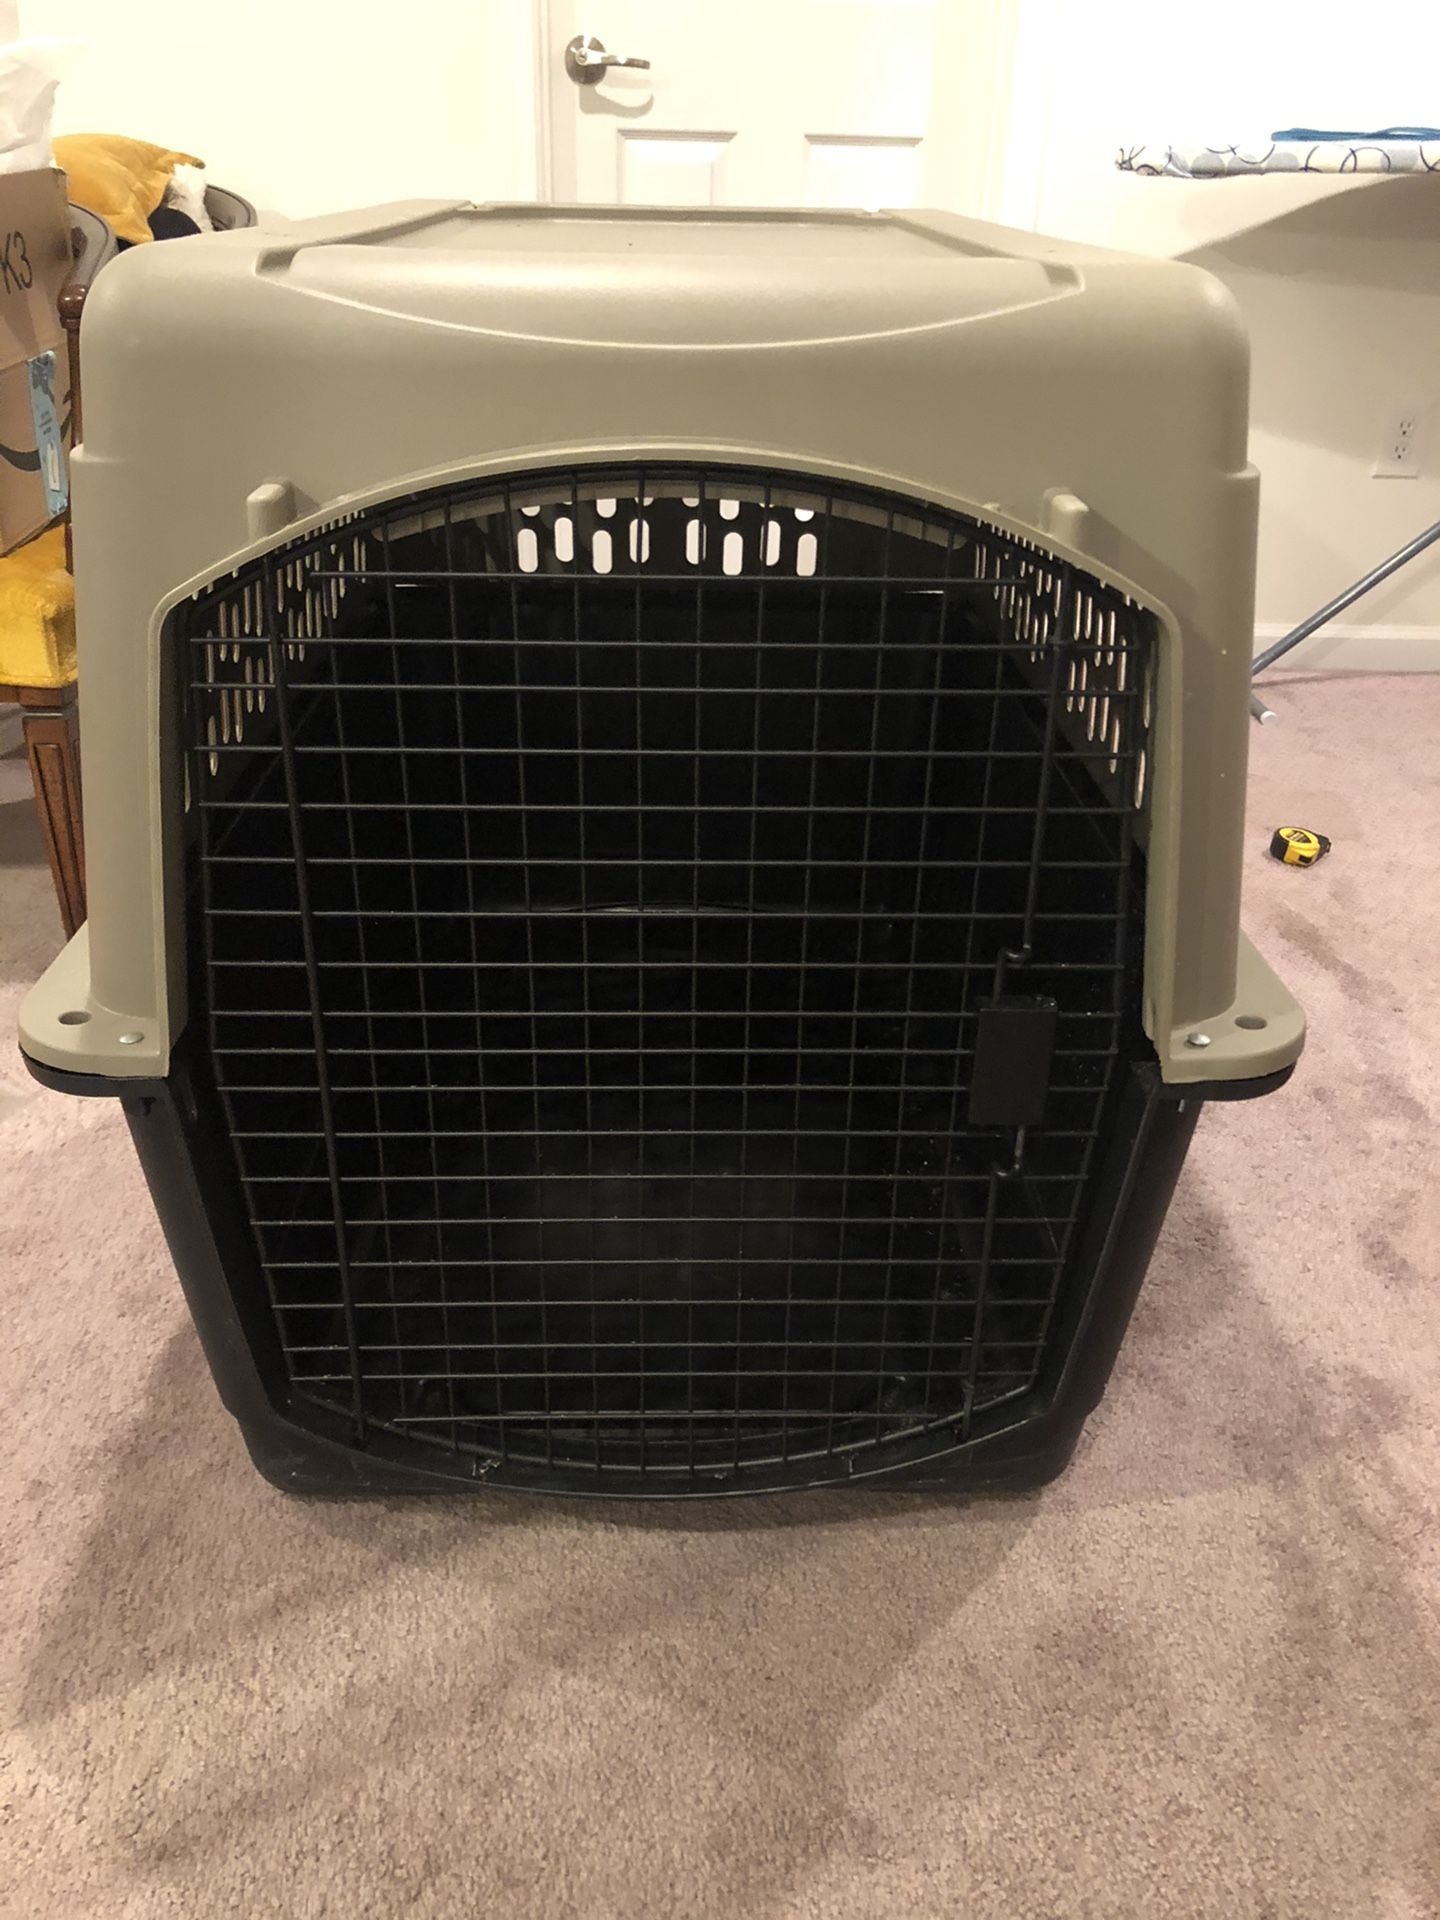 Great Choice XL Dog Crate 40"L x 27"W x 30"H Brand New